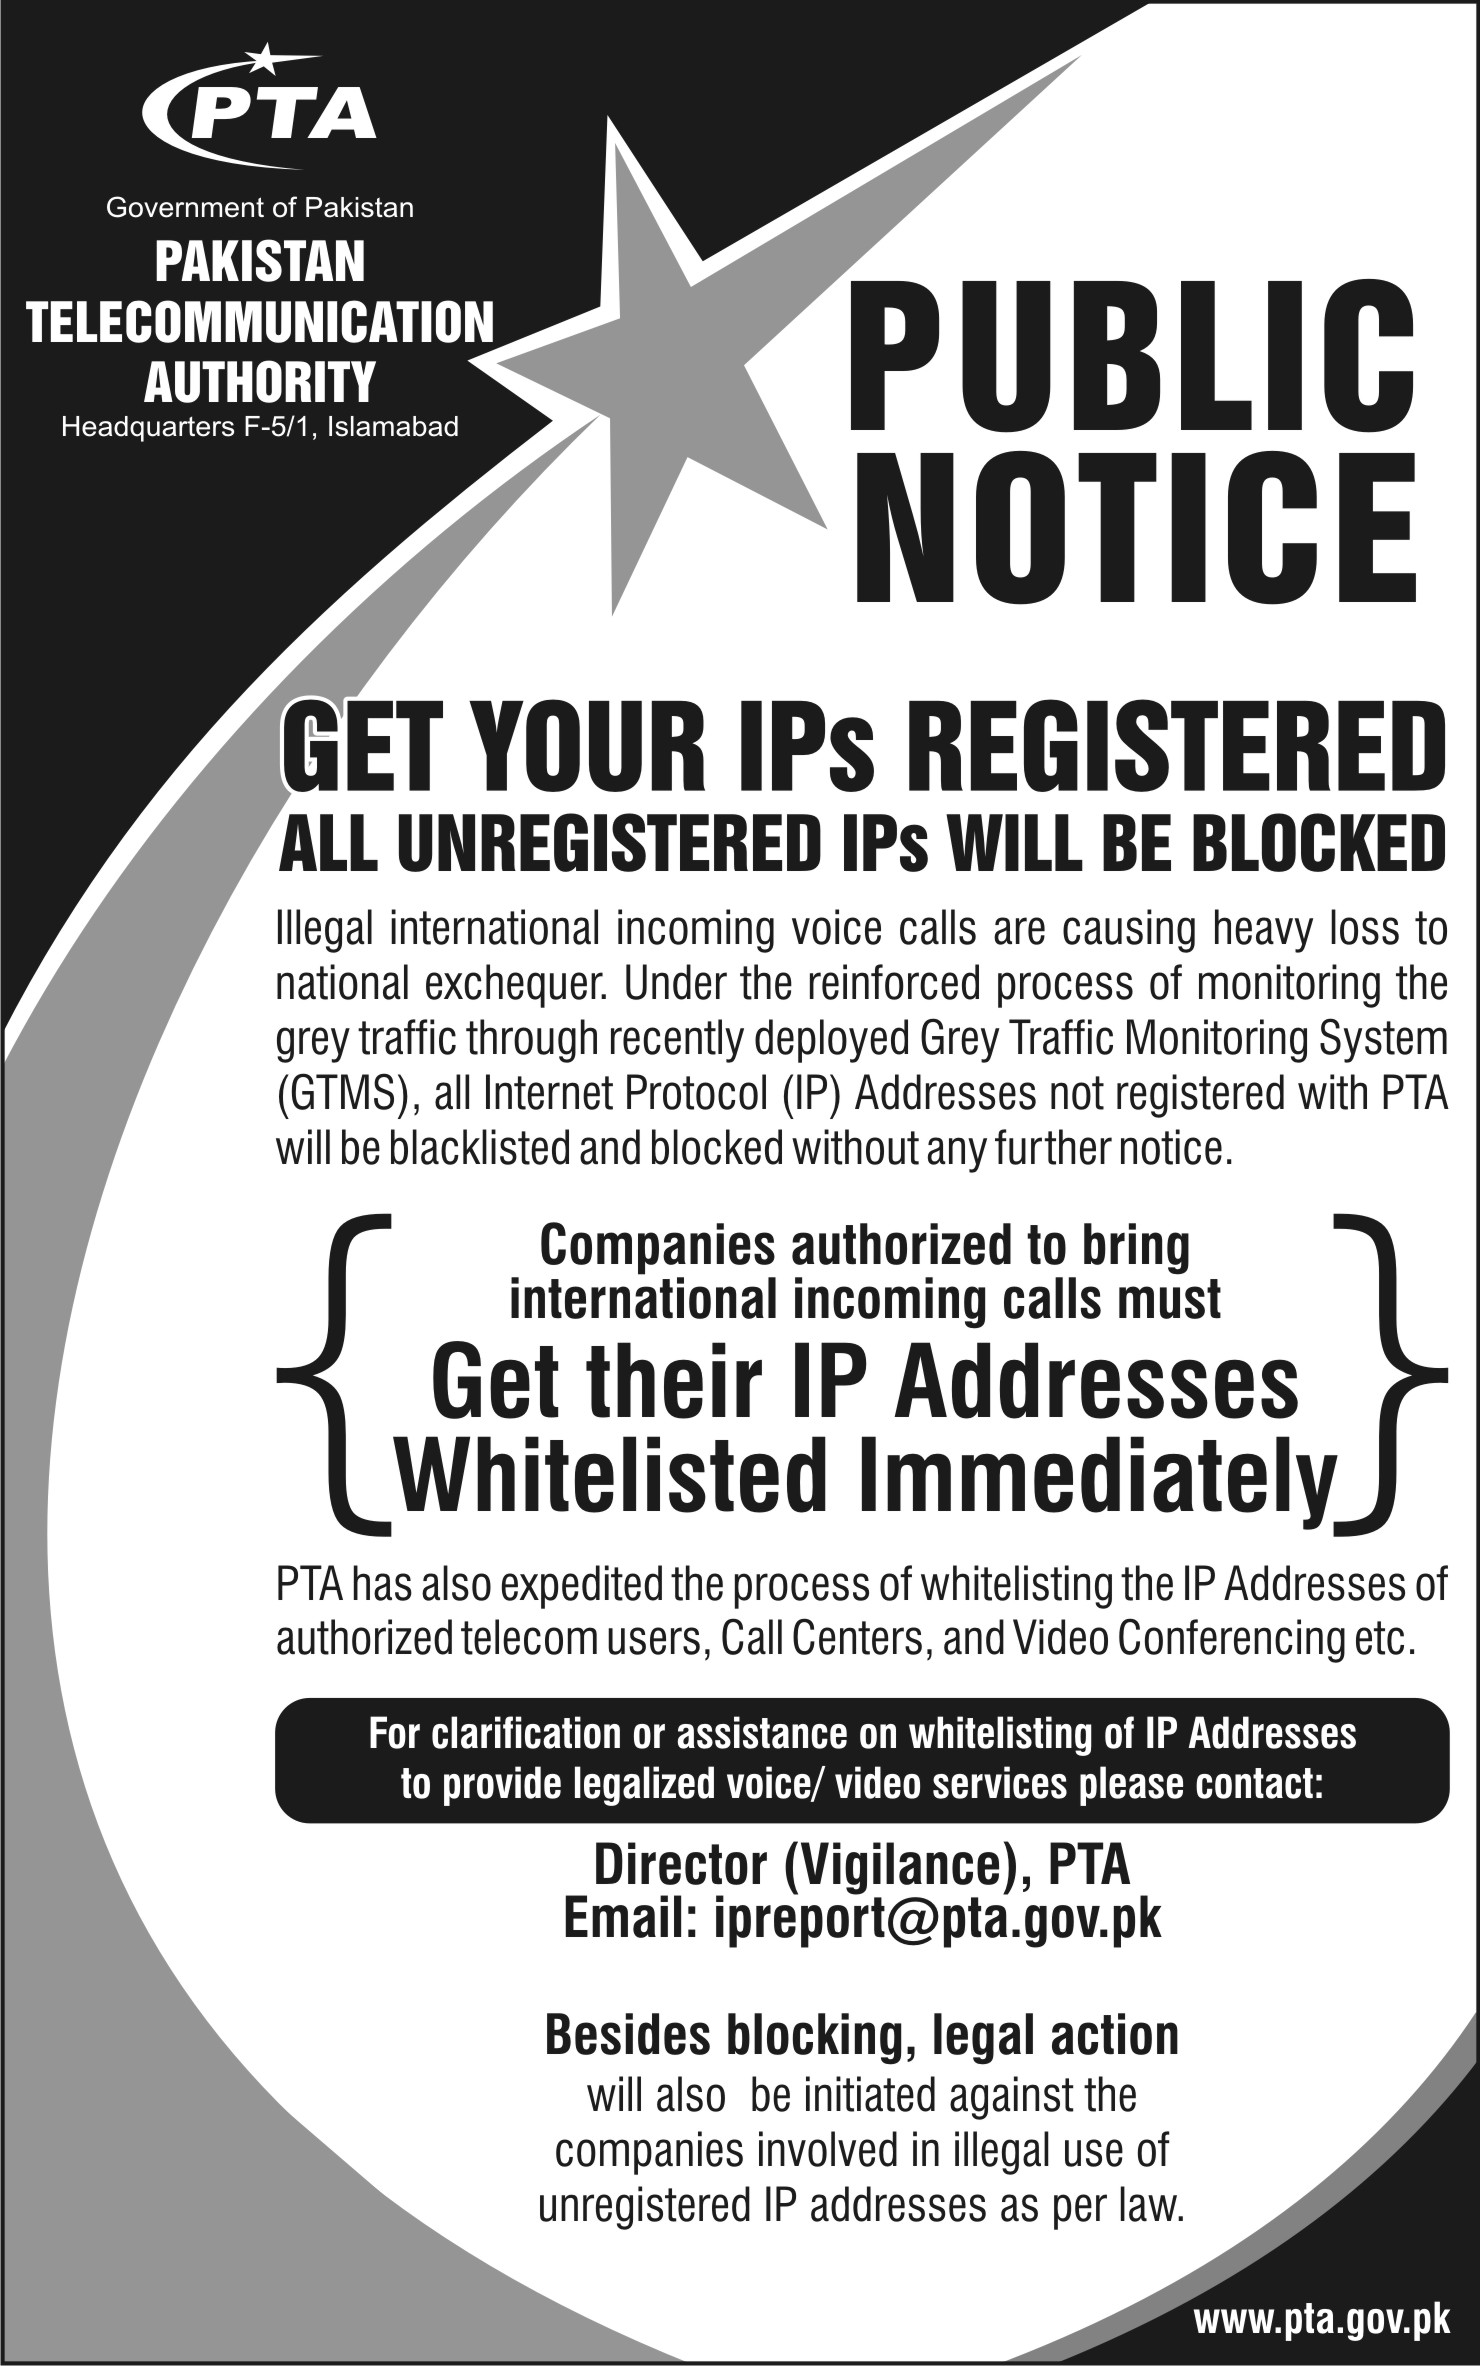 Public Notice - Get Your IPs Registered, All your unregistered IPs will be blocked